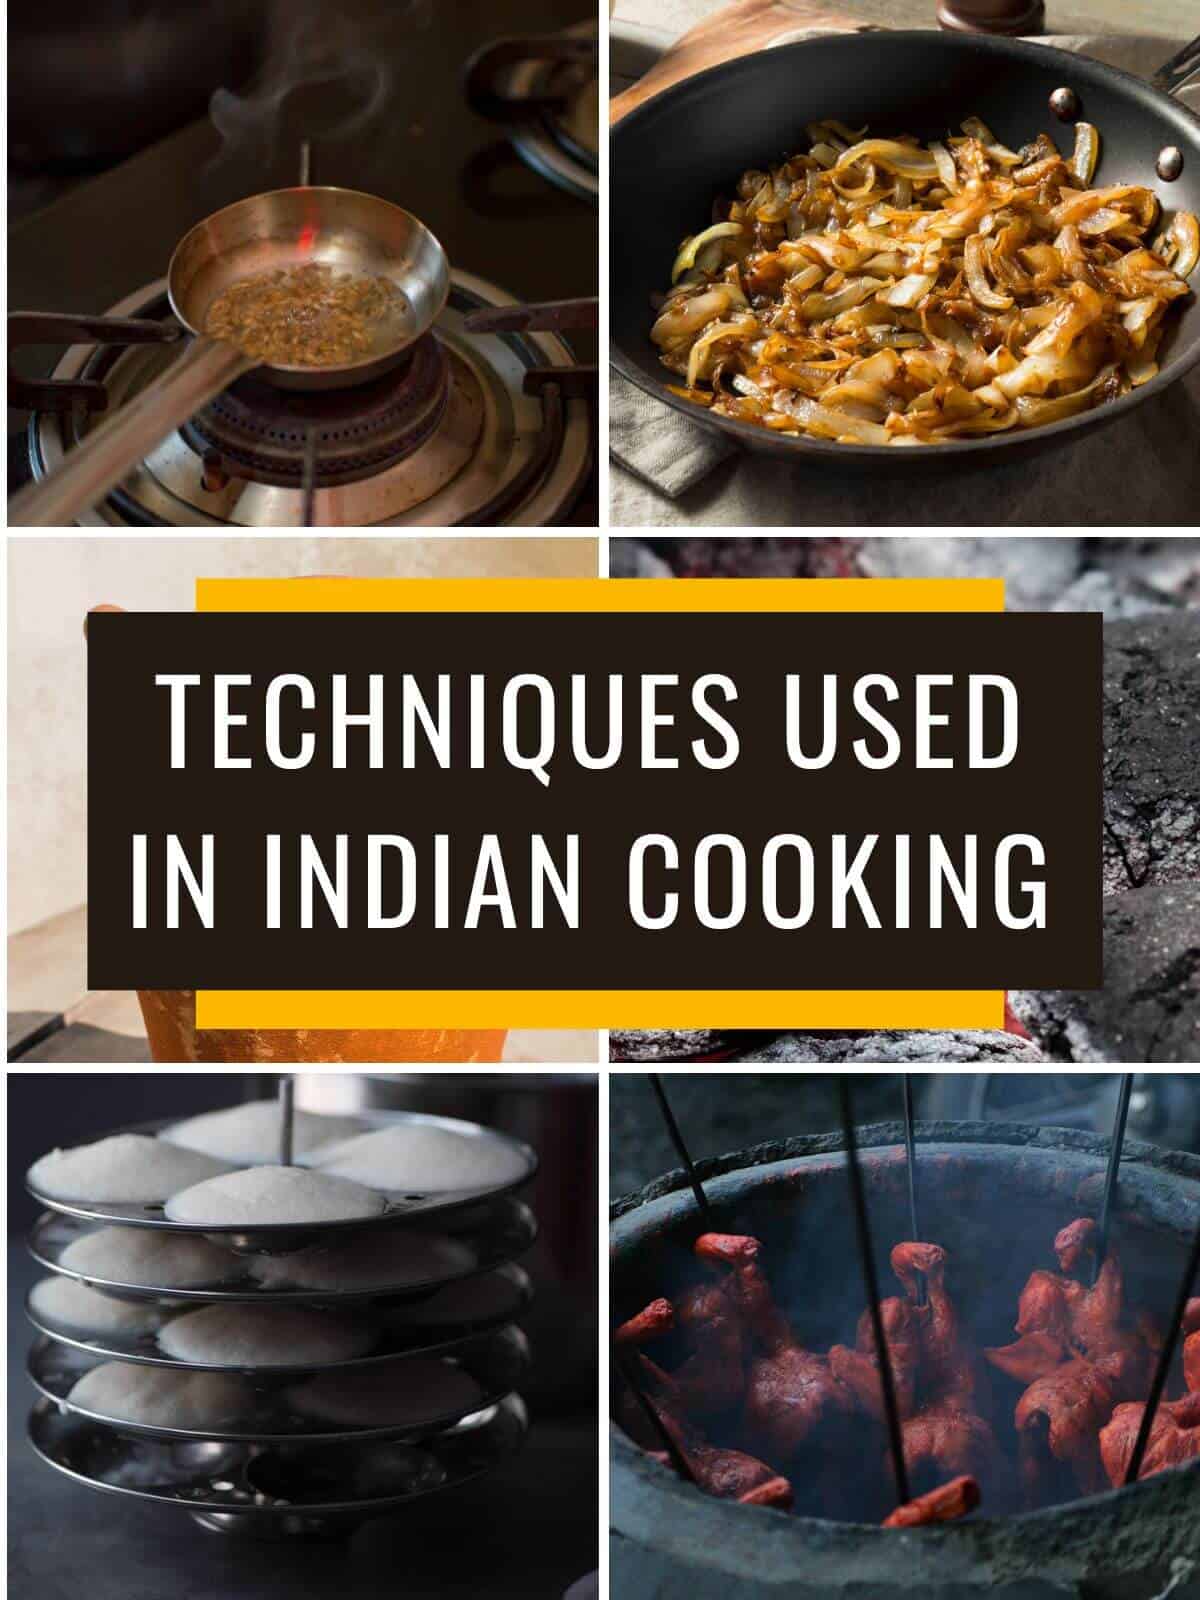 A collage of images showing different techniques used in Indian cooking